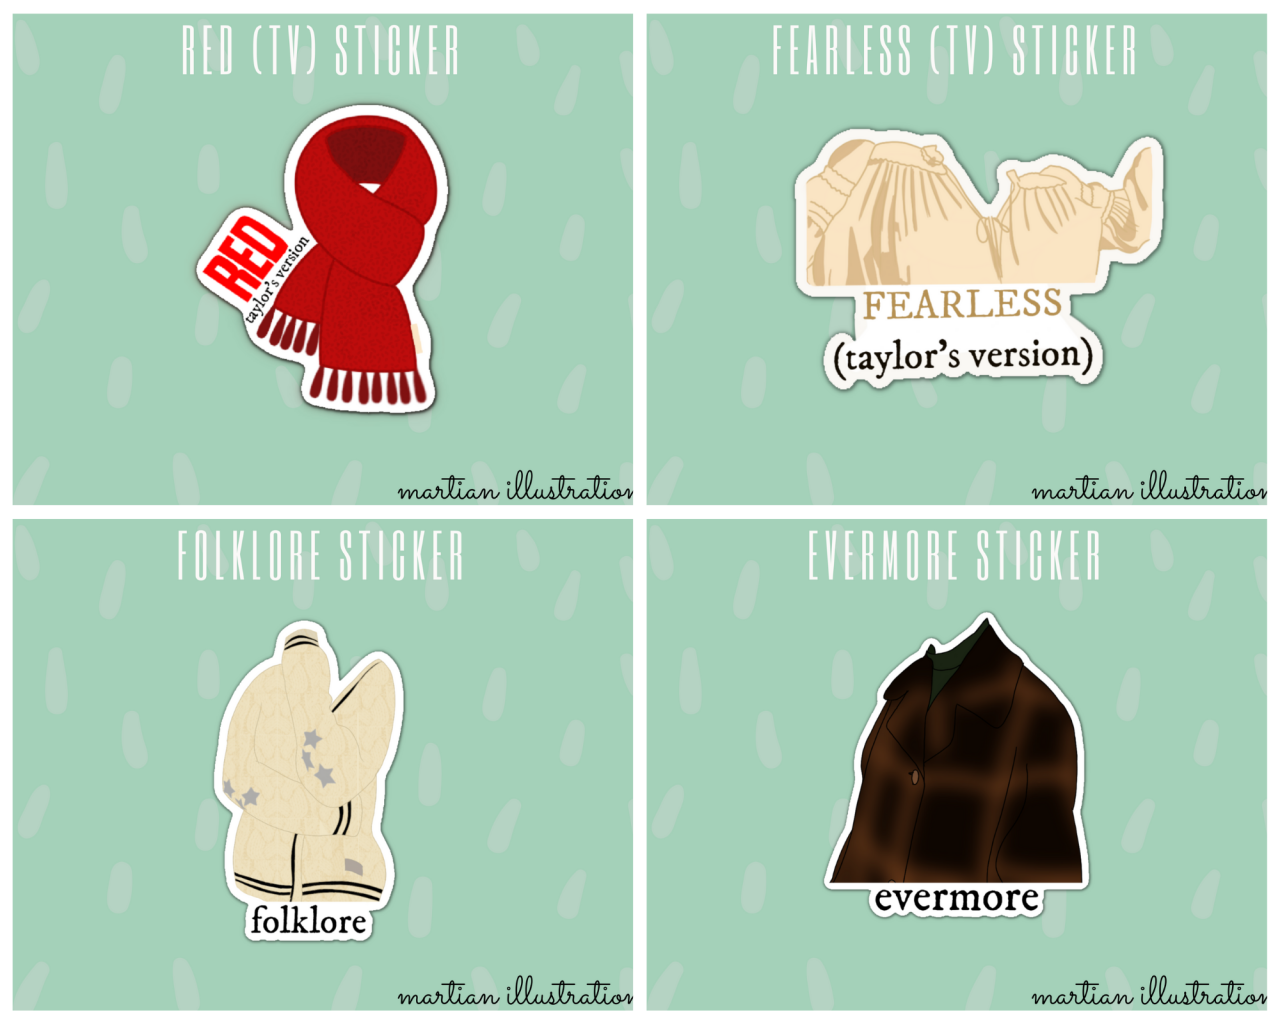 TAYLOR SWIFT STICKERS by Martian Illustration !!hi everyone! i created these little Taylor Swift stickers to celebrate taylor’s new and re-released albums! i’m a small artist who makes bookish (and sometimes musician) stickers & bookmarks! it would mean the world if you could reblog/like this! thank you so much for reading this far!!available in matte & glossy$1-4 CADLINK HERE #taylor swift#taylornation #taylor swift merch  #taylor swift red #taylor merch#taylor red #taylor swift stickers  #FEARLESS (TAYLORS VERSION)  #red (taylor’s version) #taylor scarf#taylor stickers#taylor sticker #taylor red scarf  #taylor switft stickers  #taylor sticker red #evermore#fearless#folklore#red scarf#red sticker#red merch